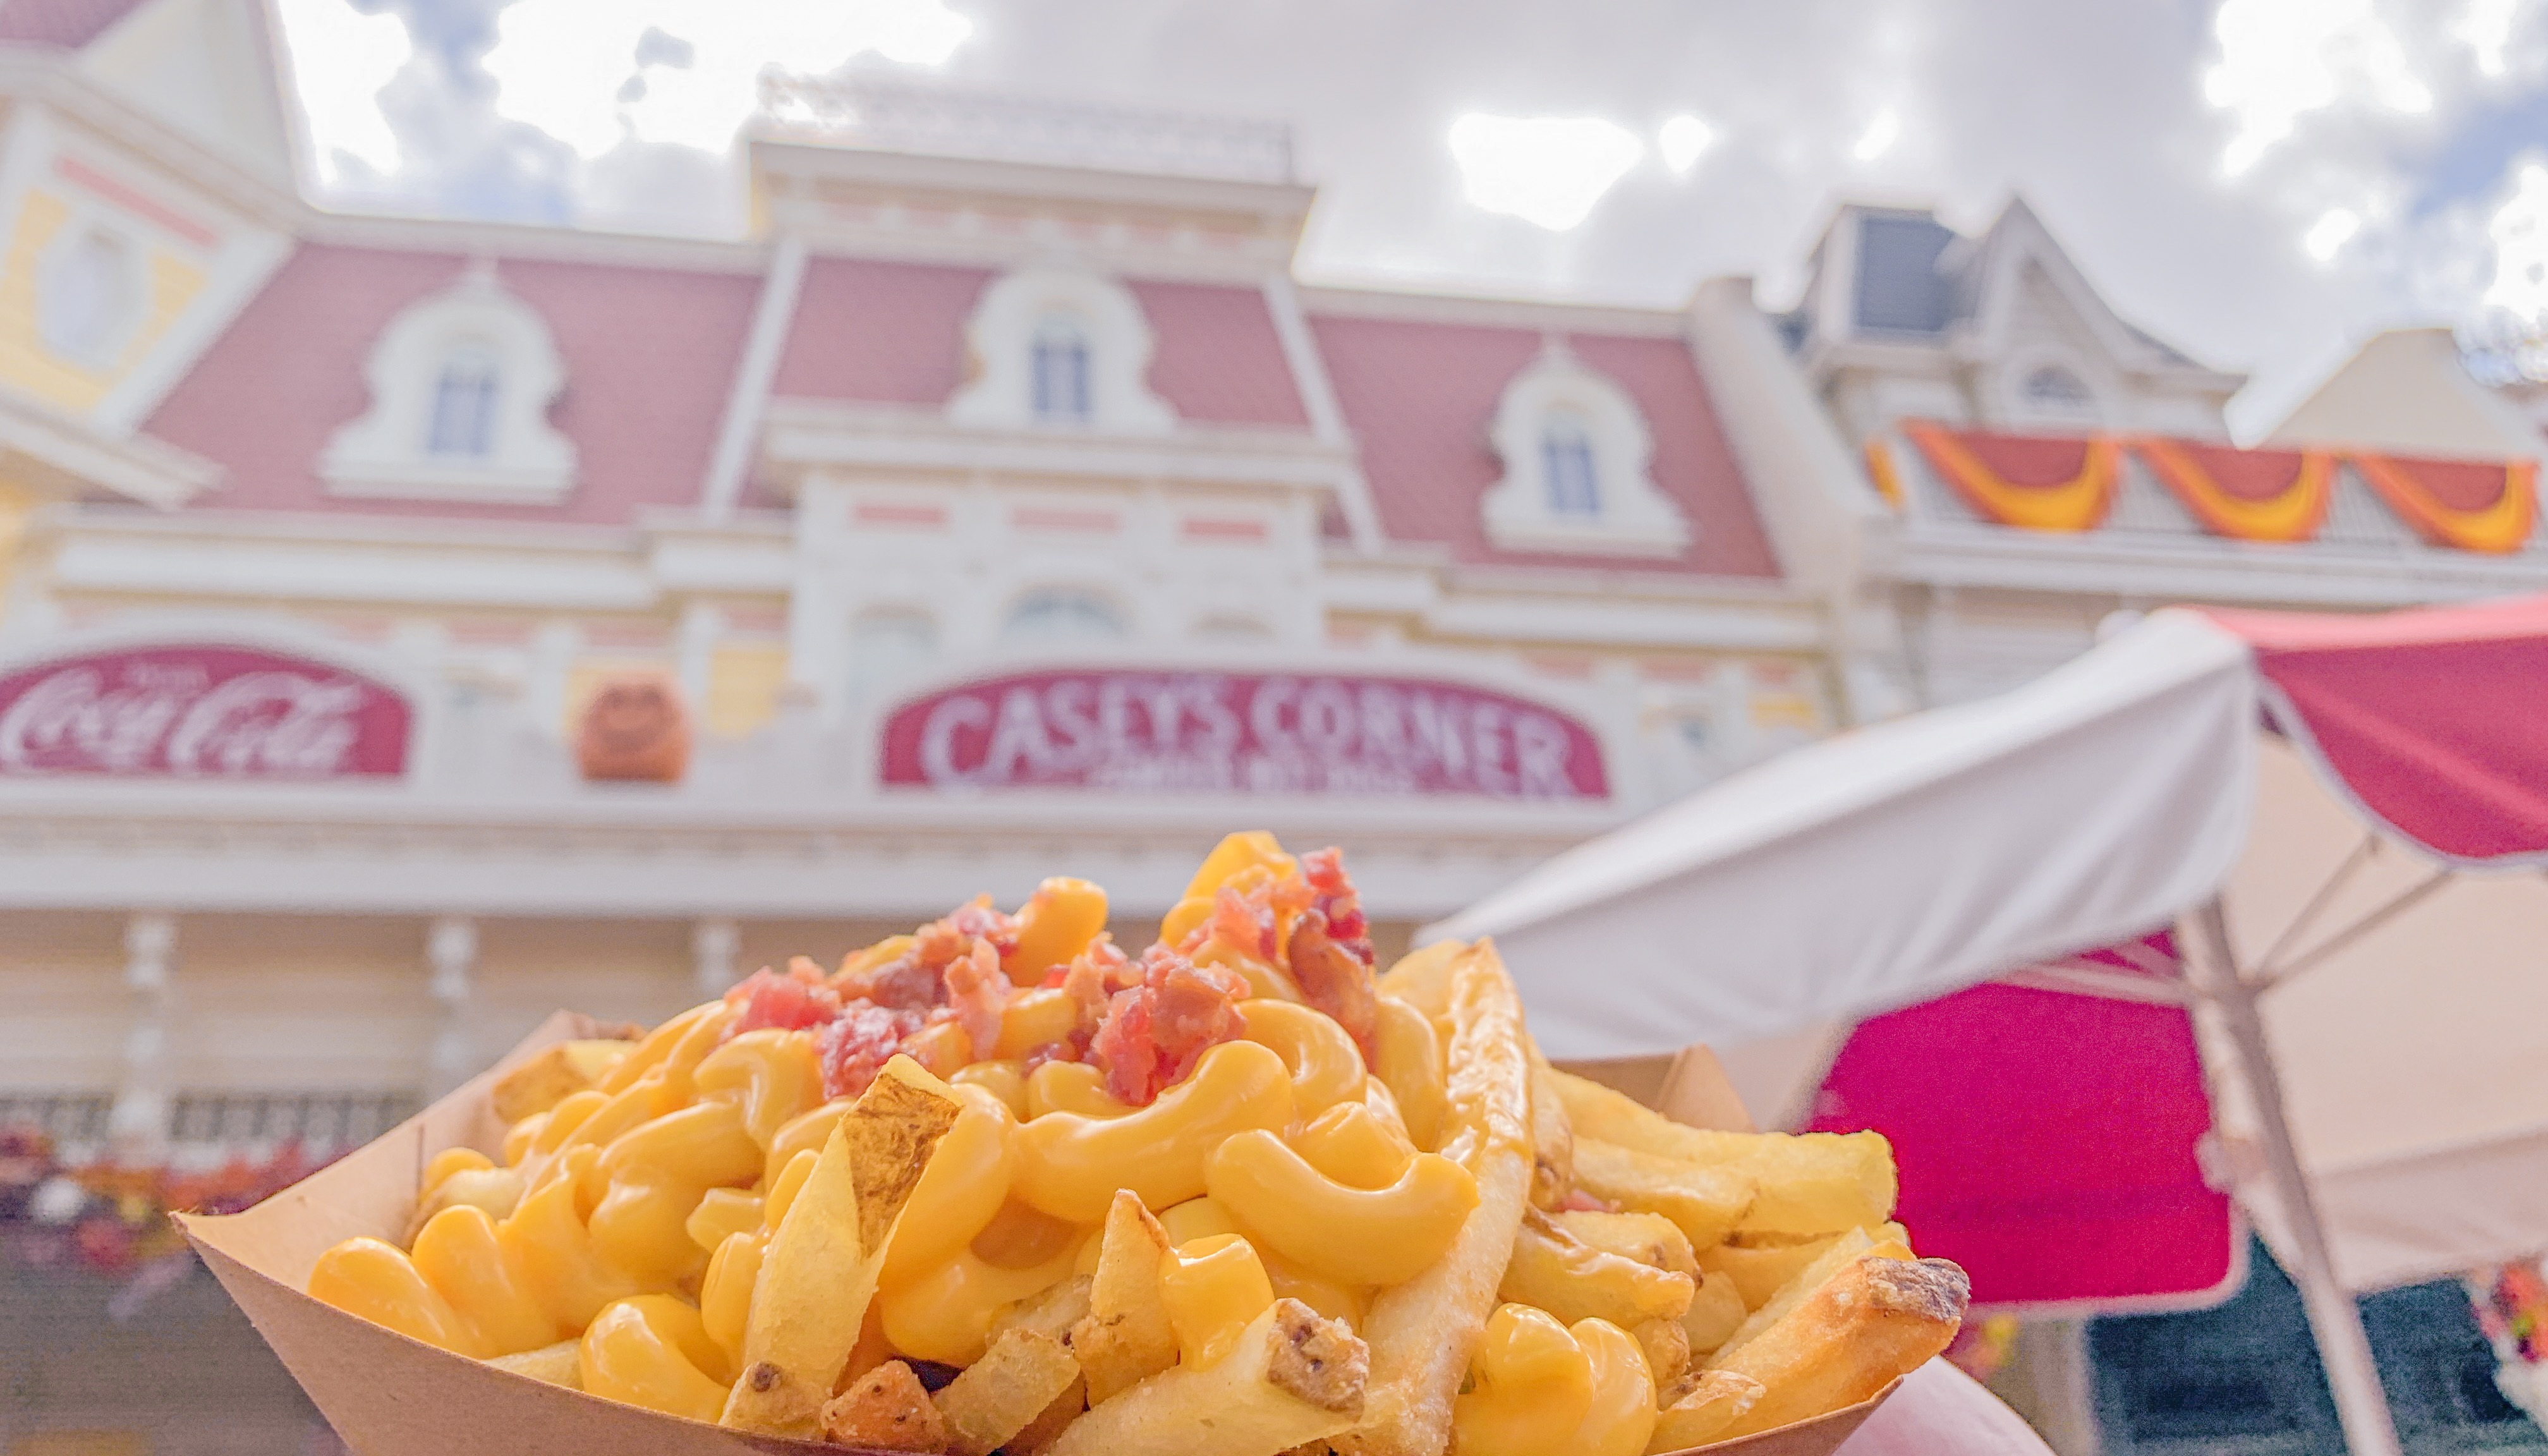 New Bacon Mac n Cheese Fries at Casey’s Corner!